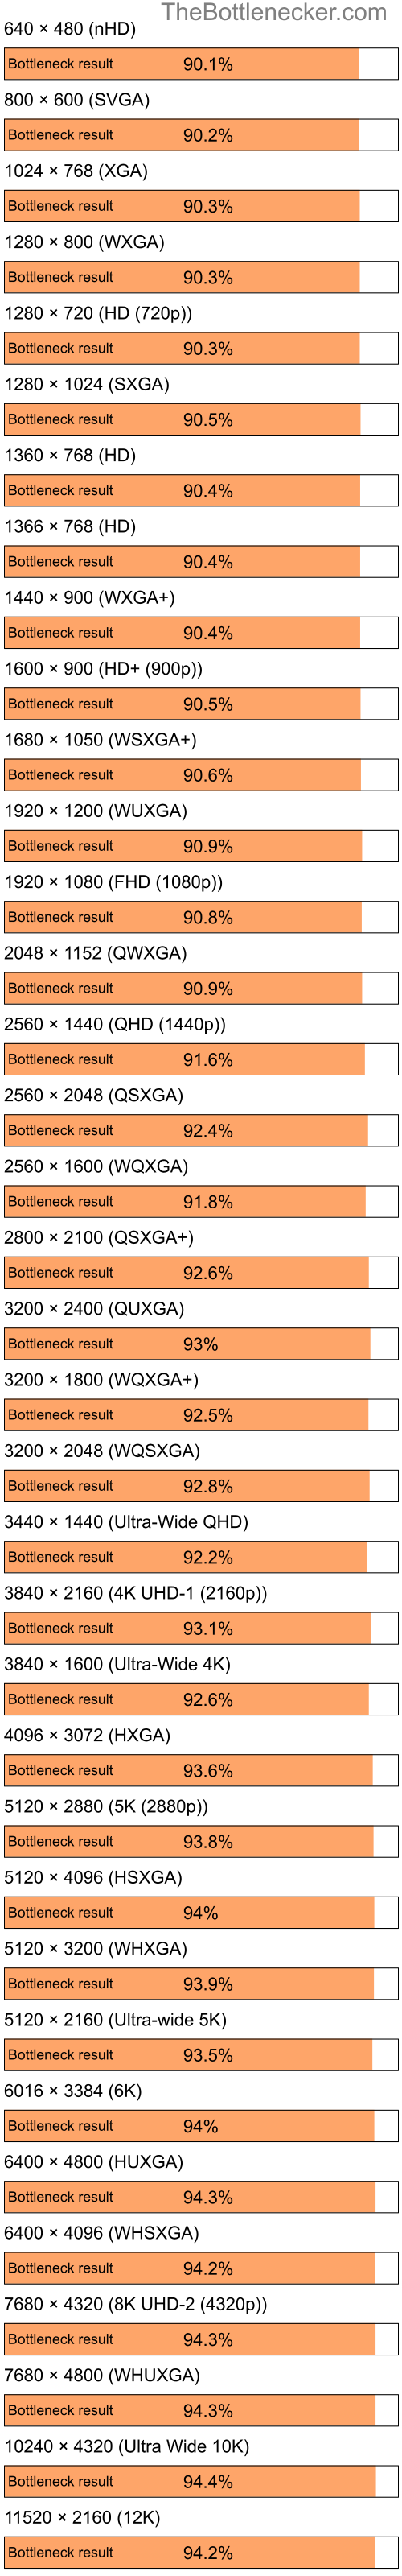 Bottleneck results by resolution for Intel Pentium 4 and AMD Mobility Radeon 9200 in General Tasks